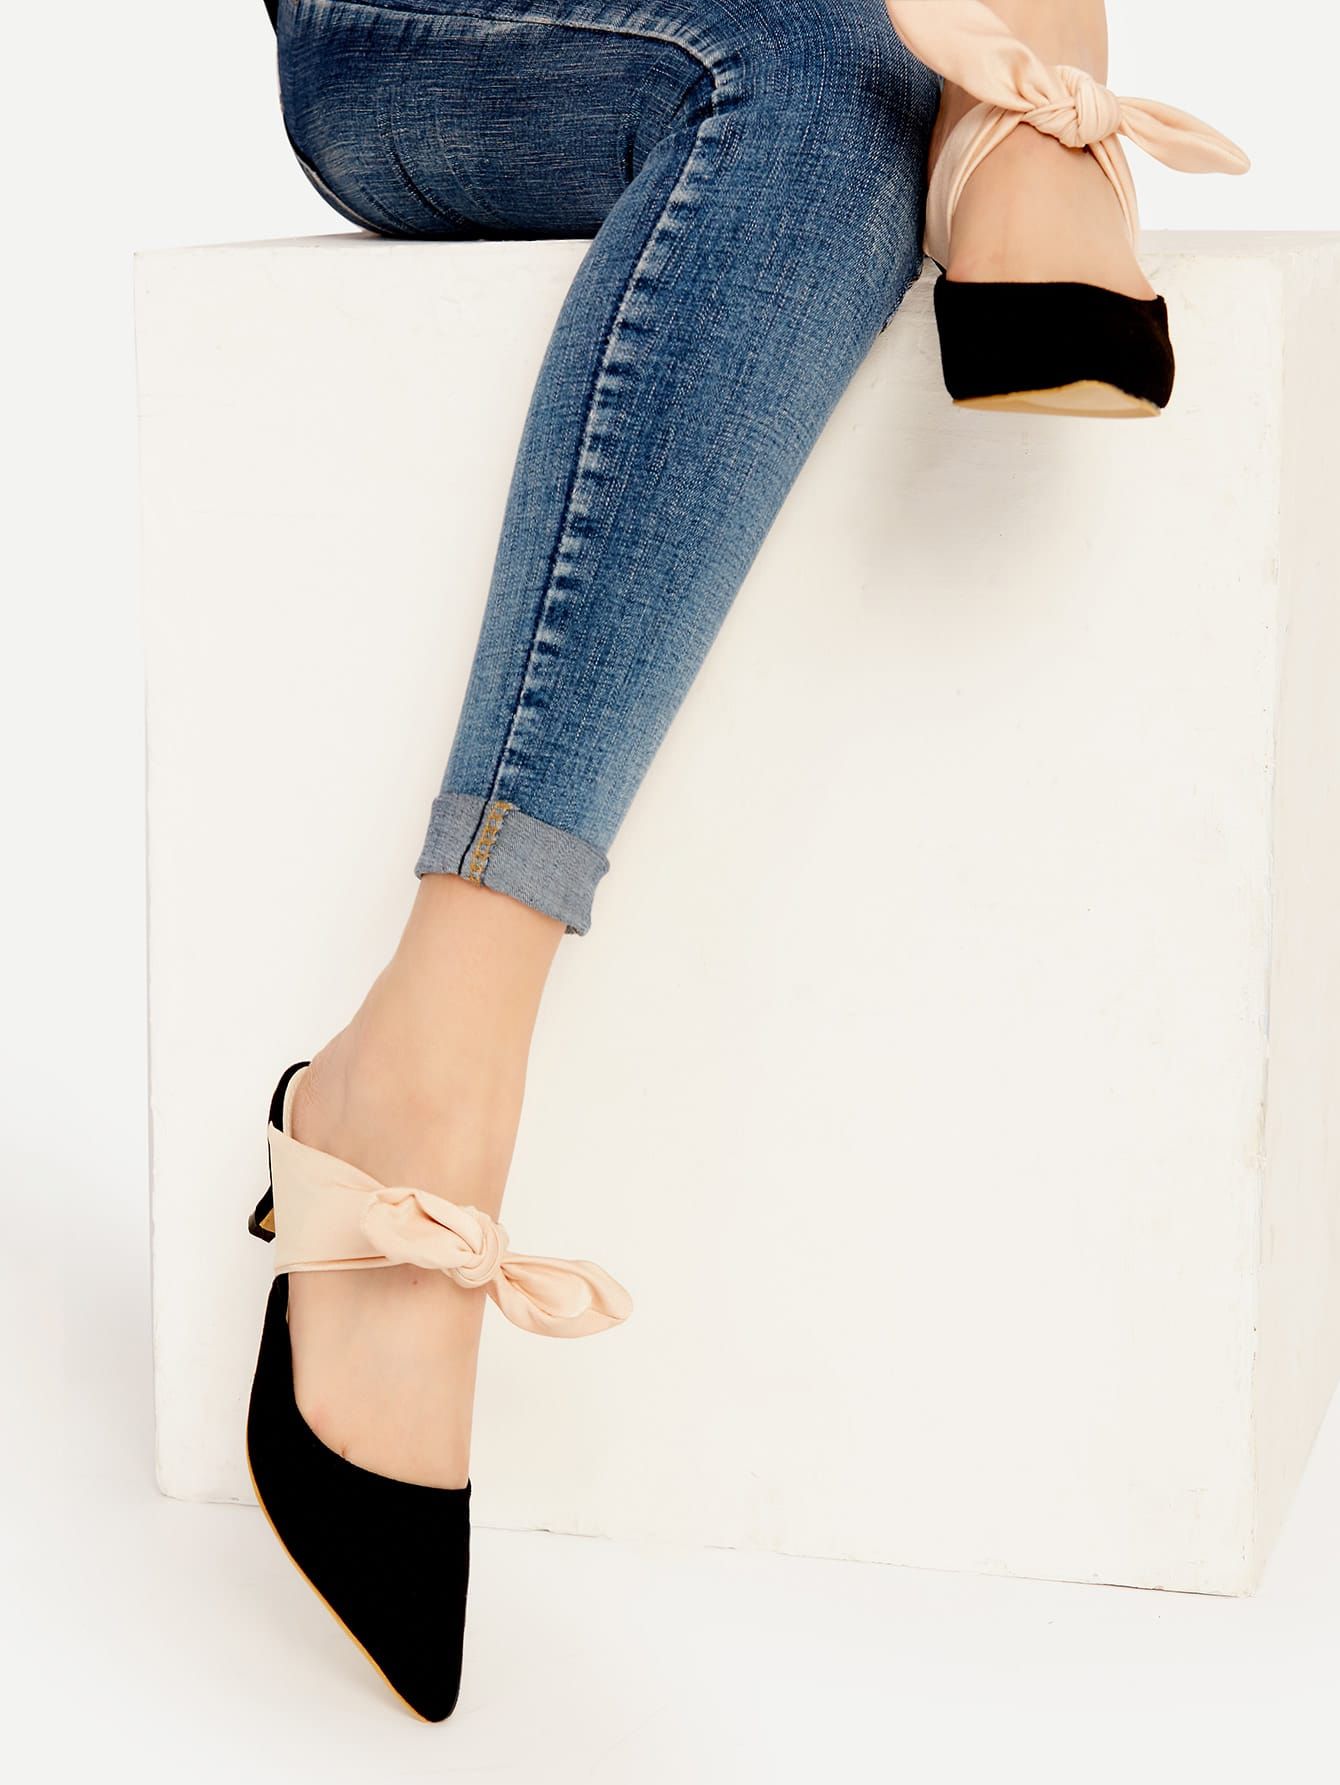 Black Point Toe Contrast Bow Tie Heeled Mules | SHEIN